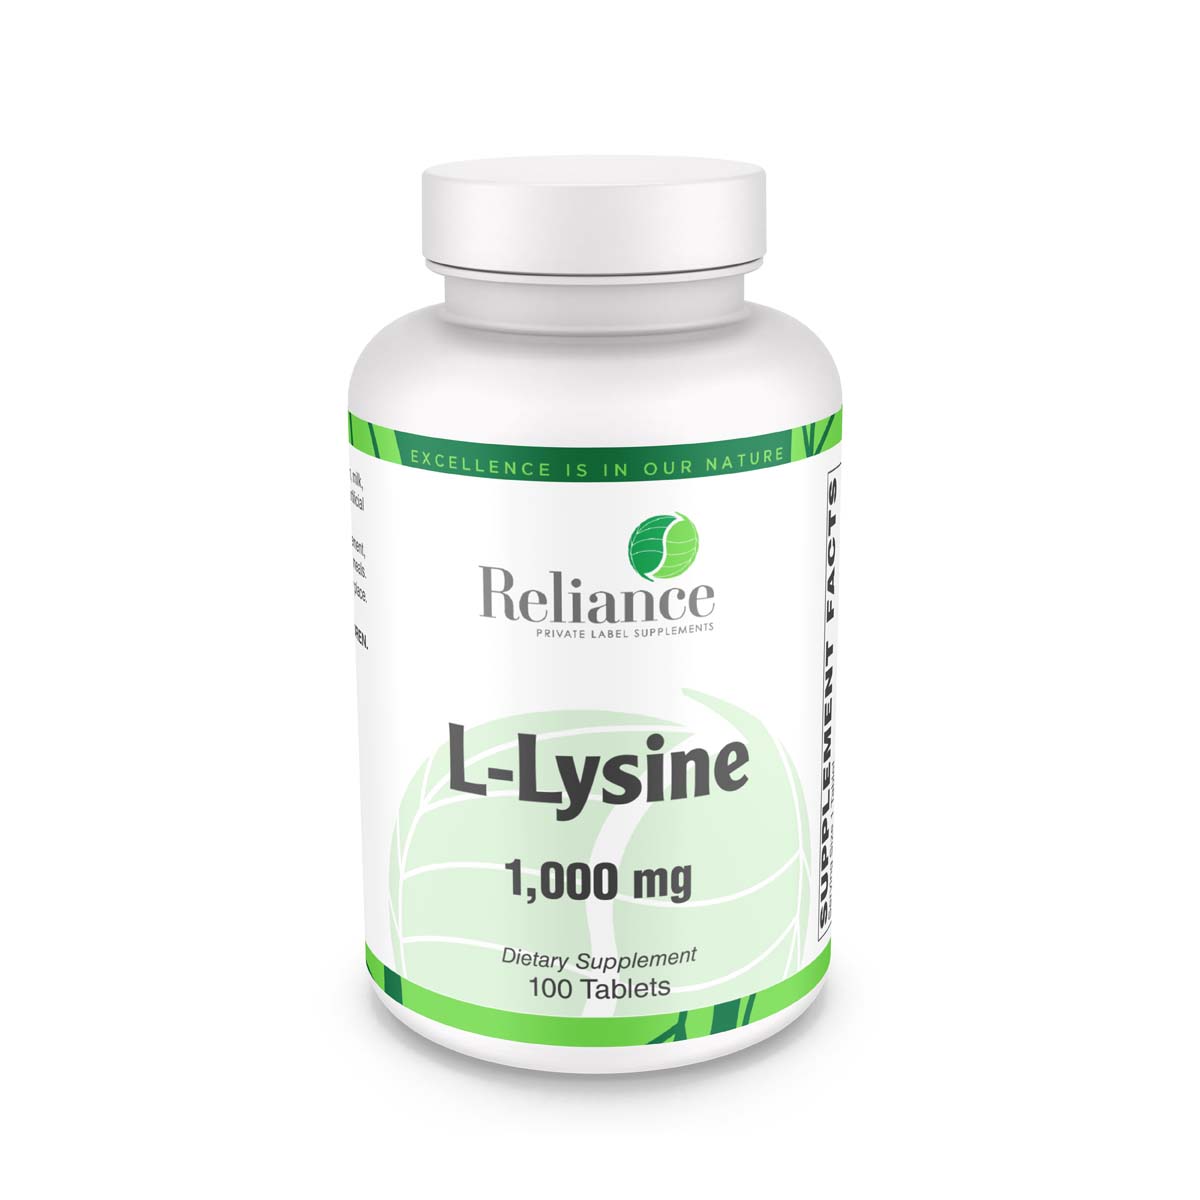 L-Lysine, 1,000mg - Reliance Private Label Supplements